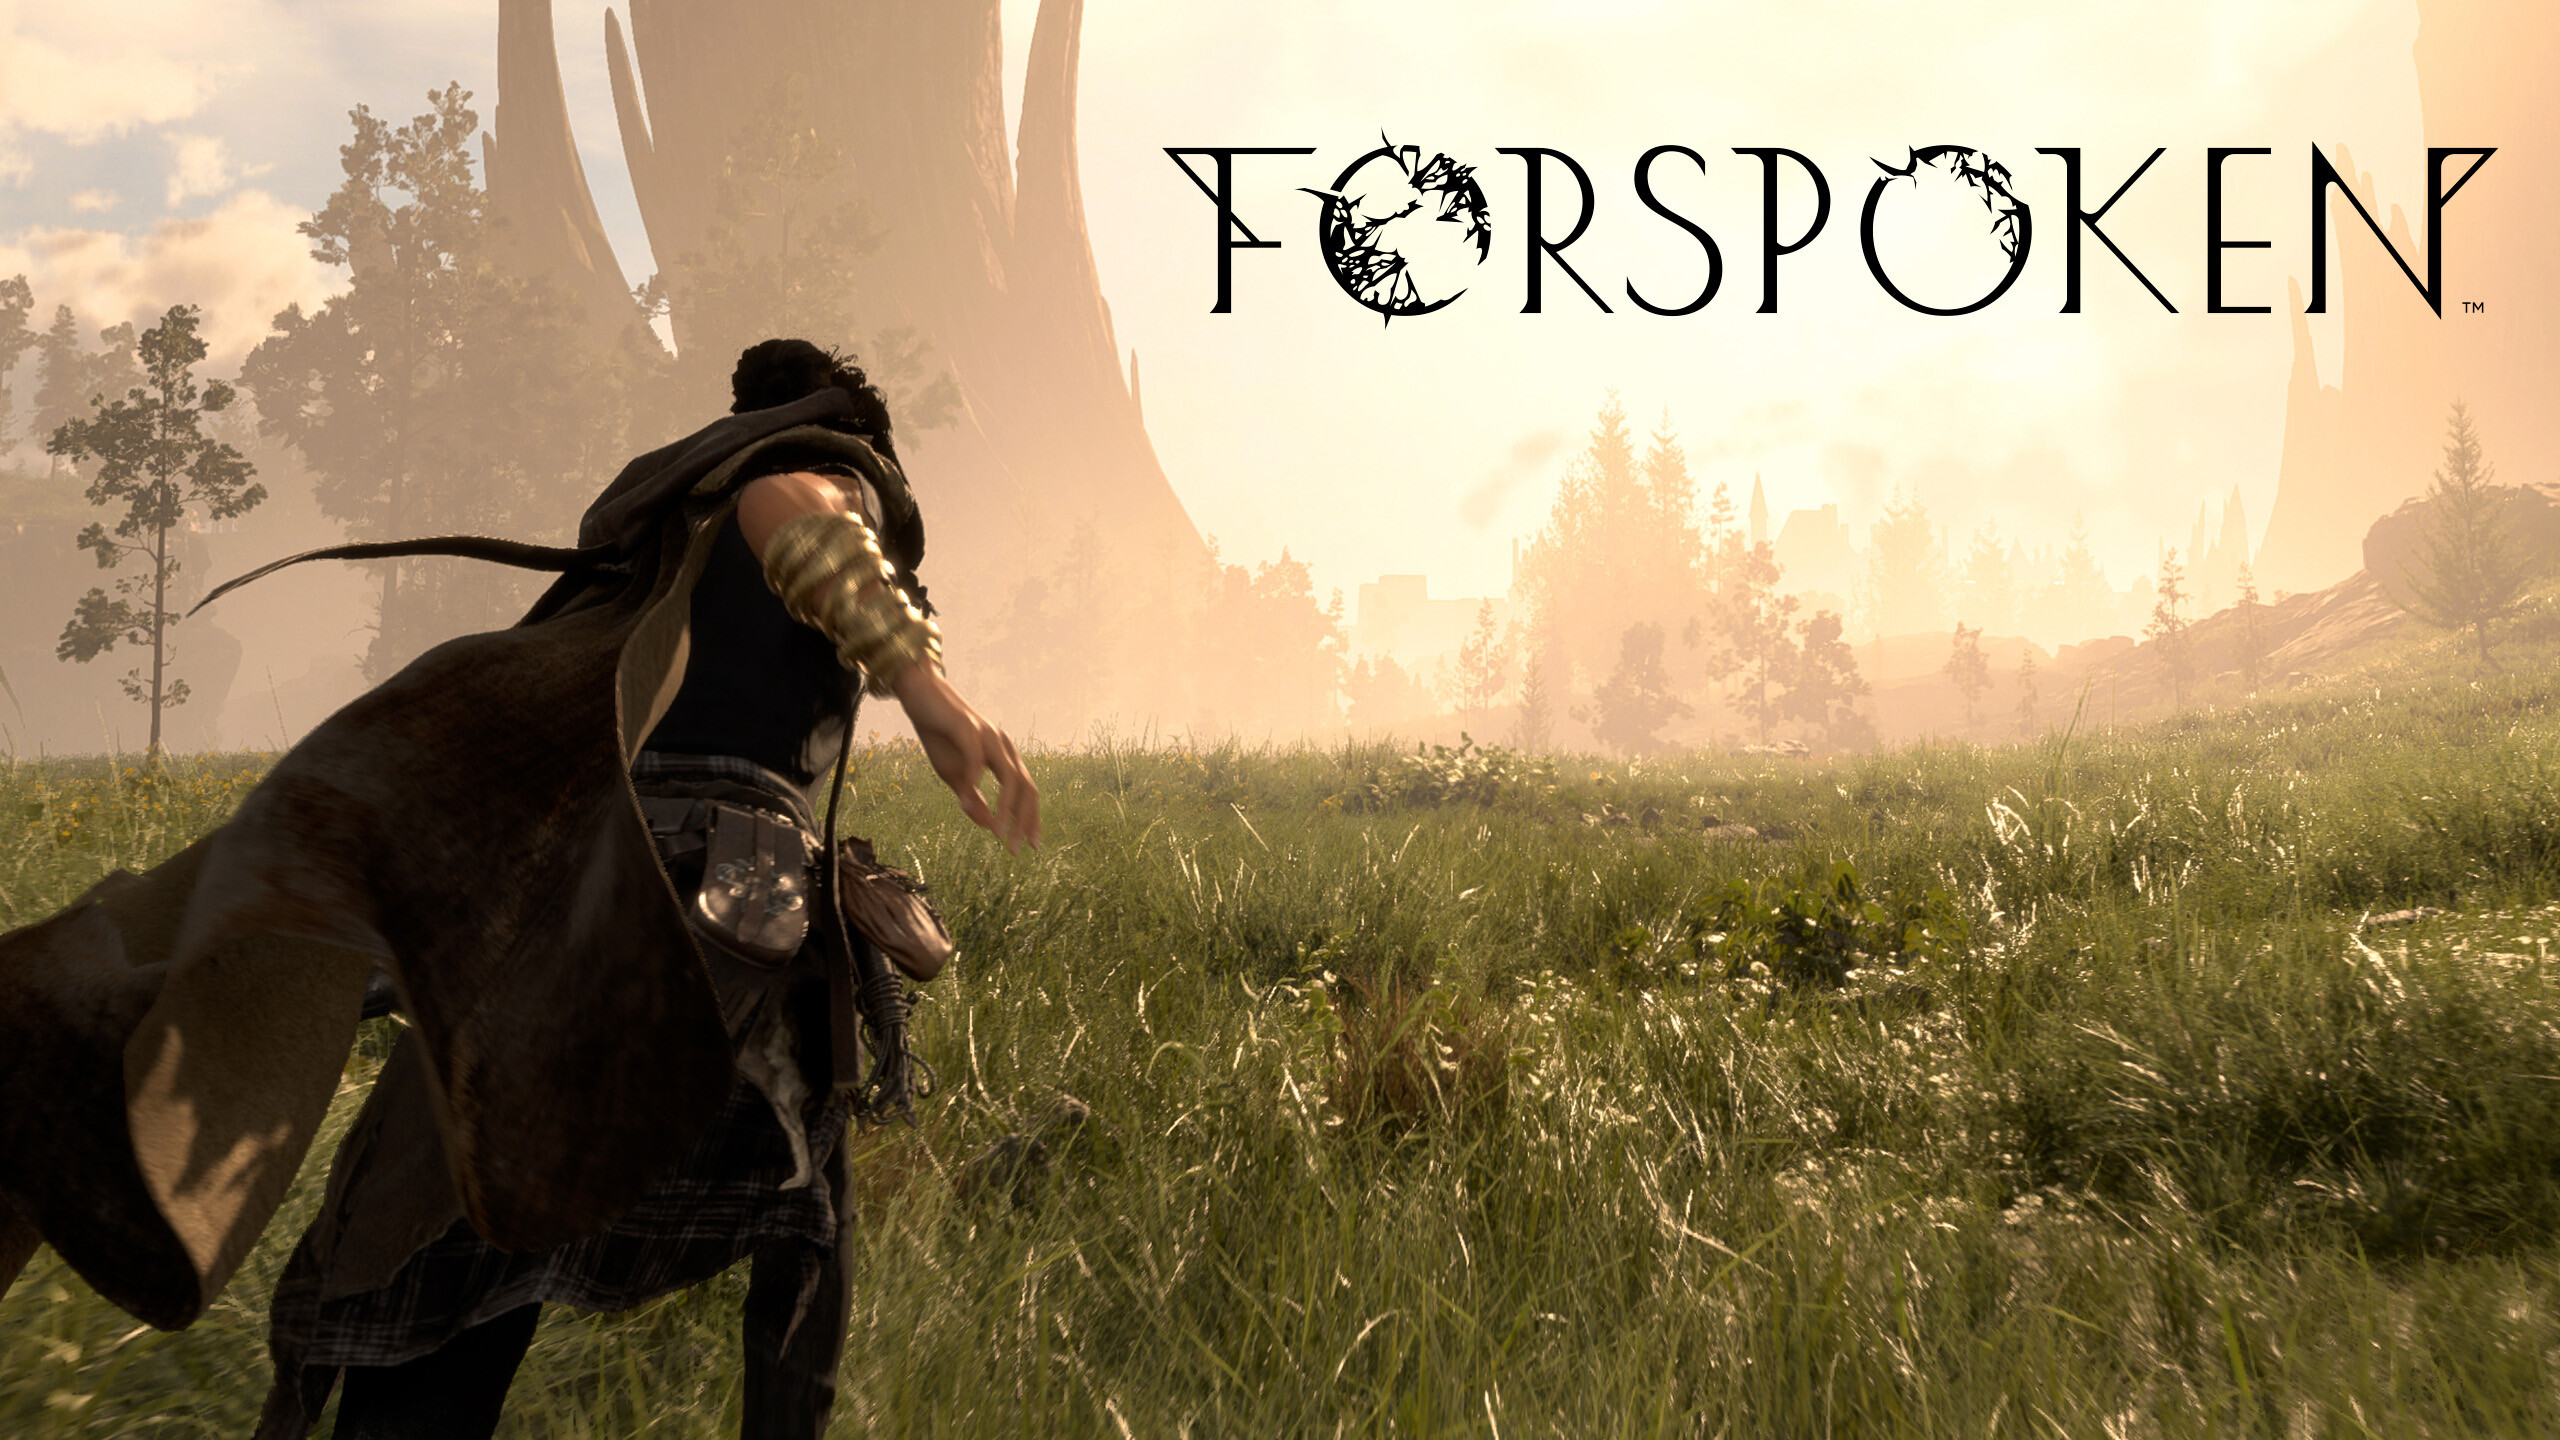 Forspoken: An open-world fantasy game, Developed by Luminous Productions. 2560x1440 HD Background.